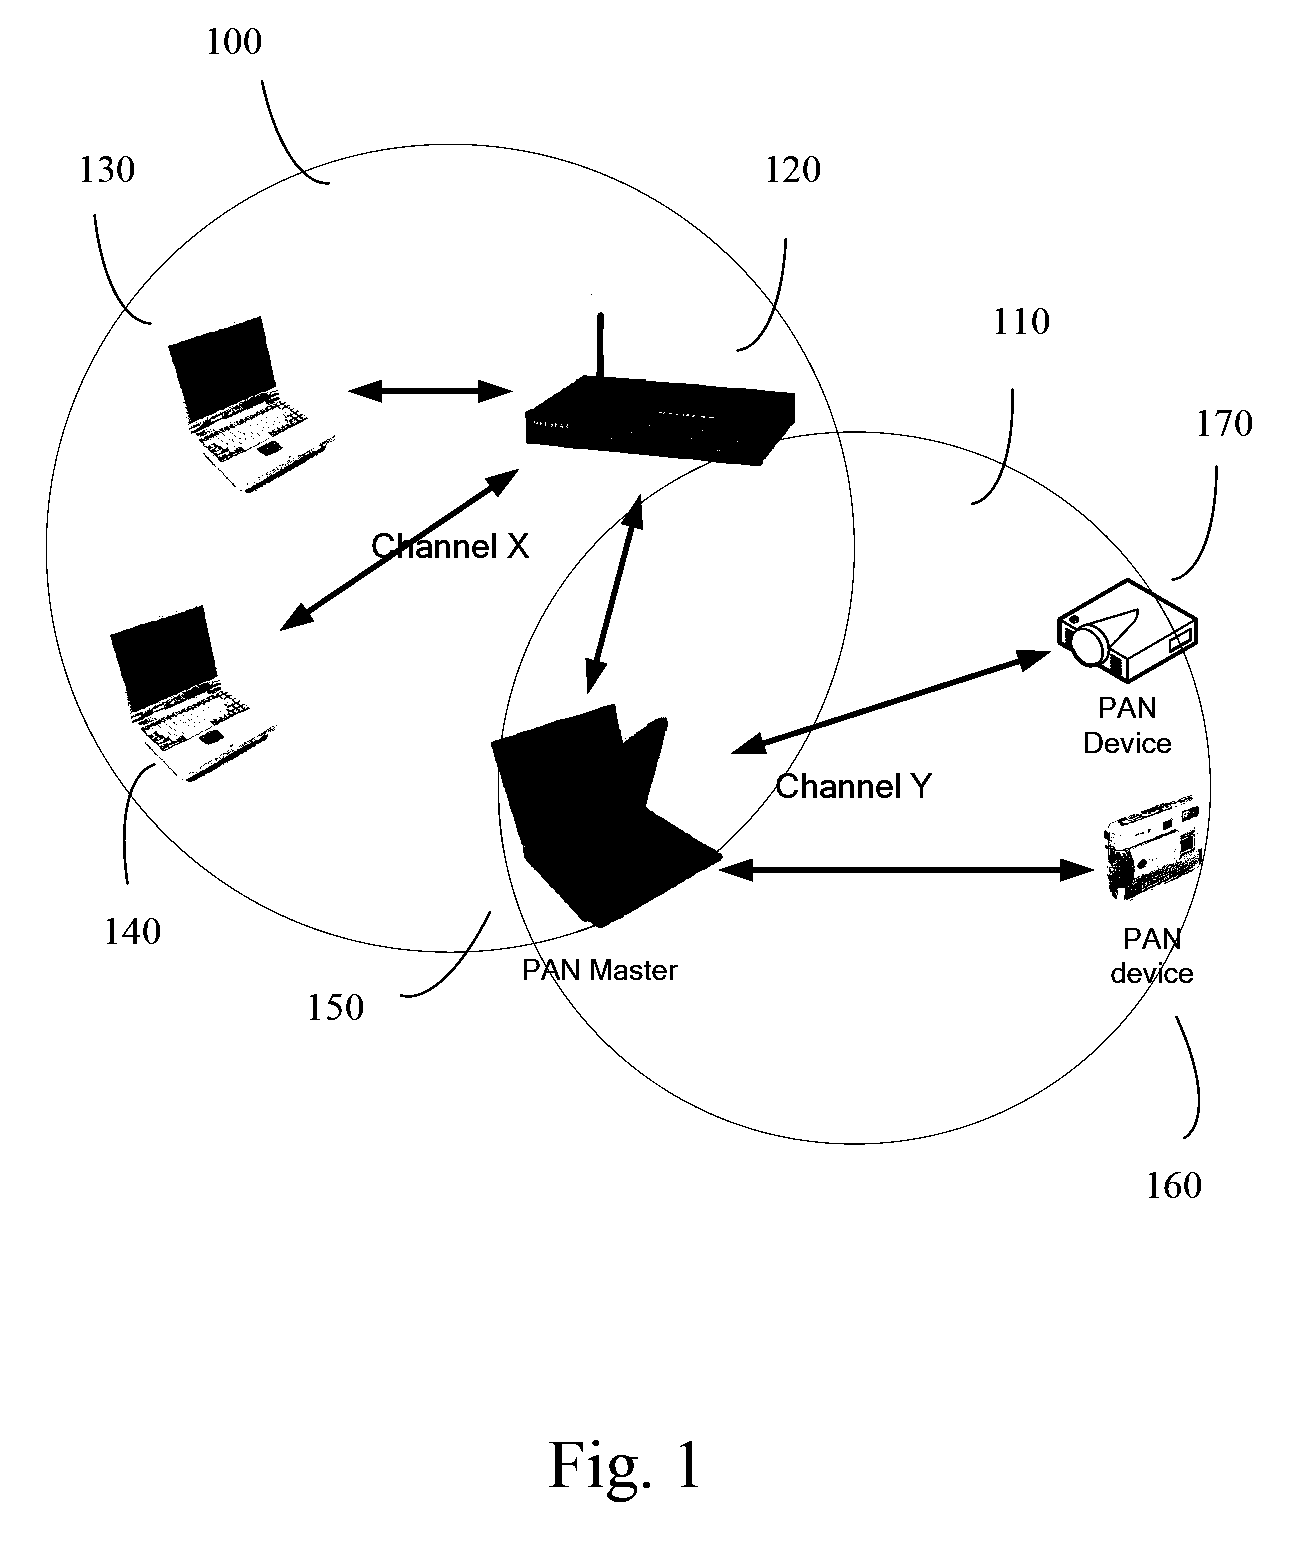 Method and apparatus for improved dual channel operation and access point discovery in wireless communication networks